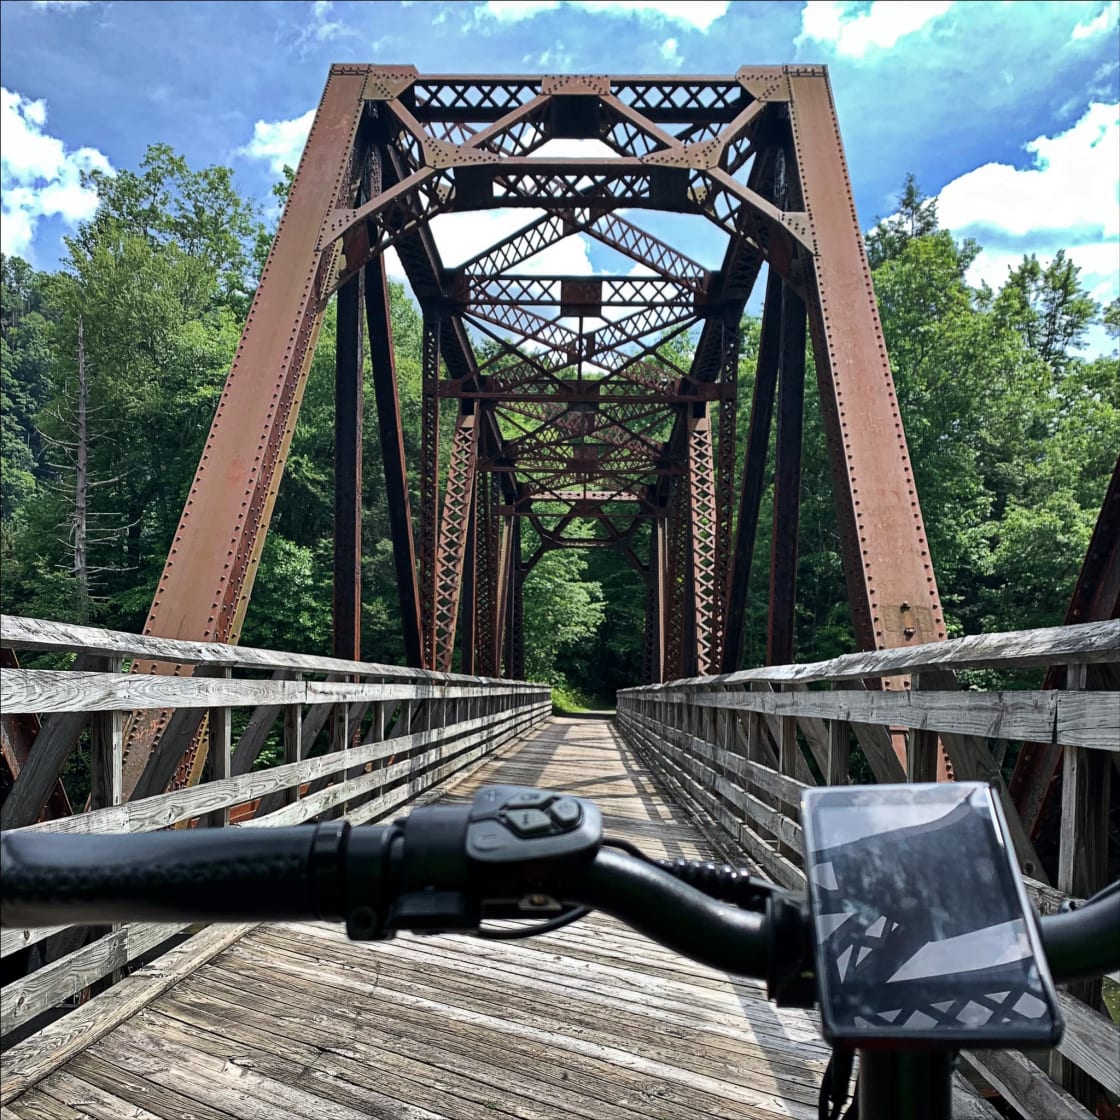 just a picture from the Greenbrier Rail-trail.  Marlinton is about 10 miles away and quiet reachable if you need civilization :)